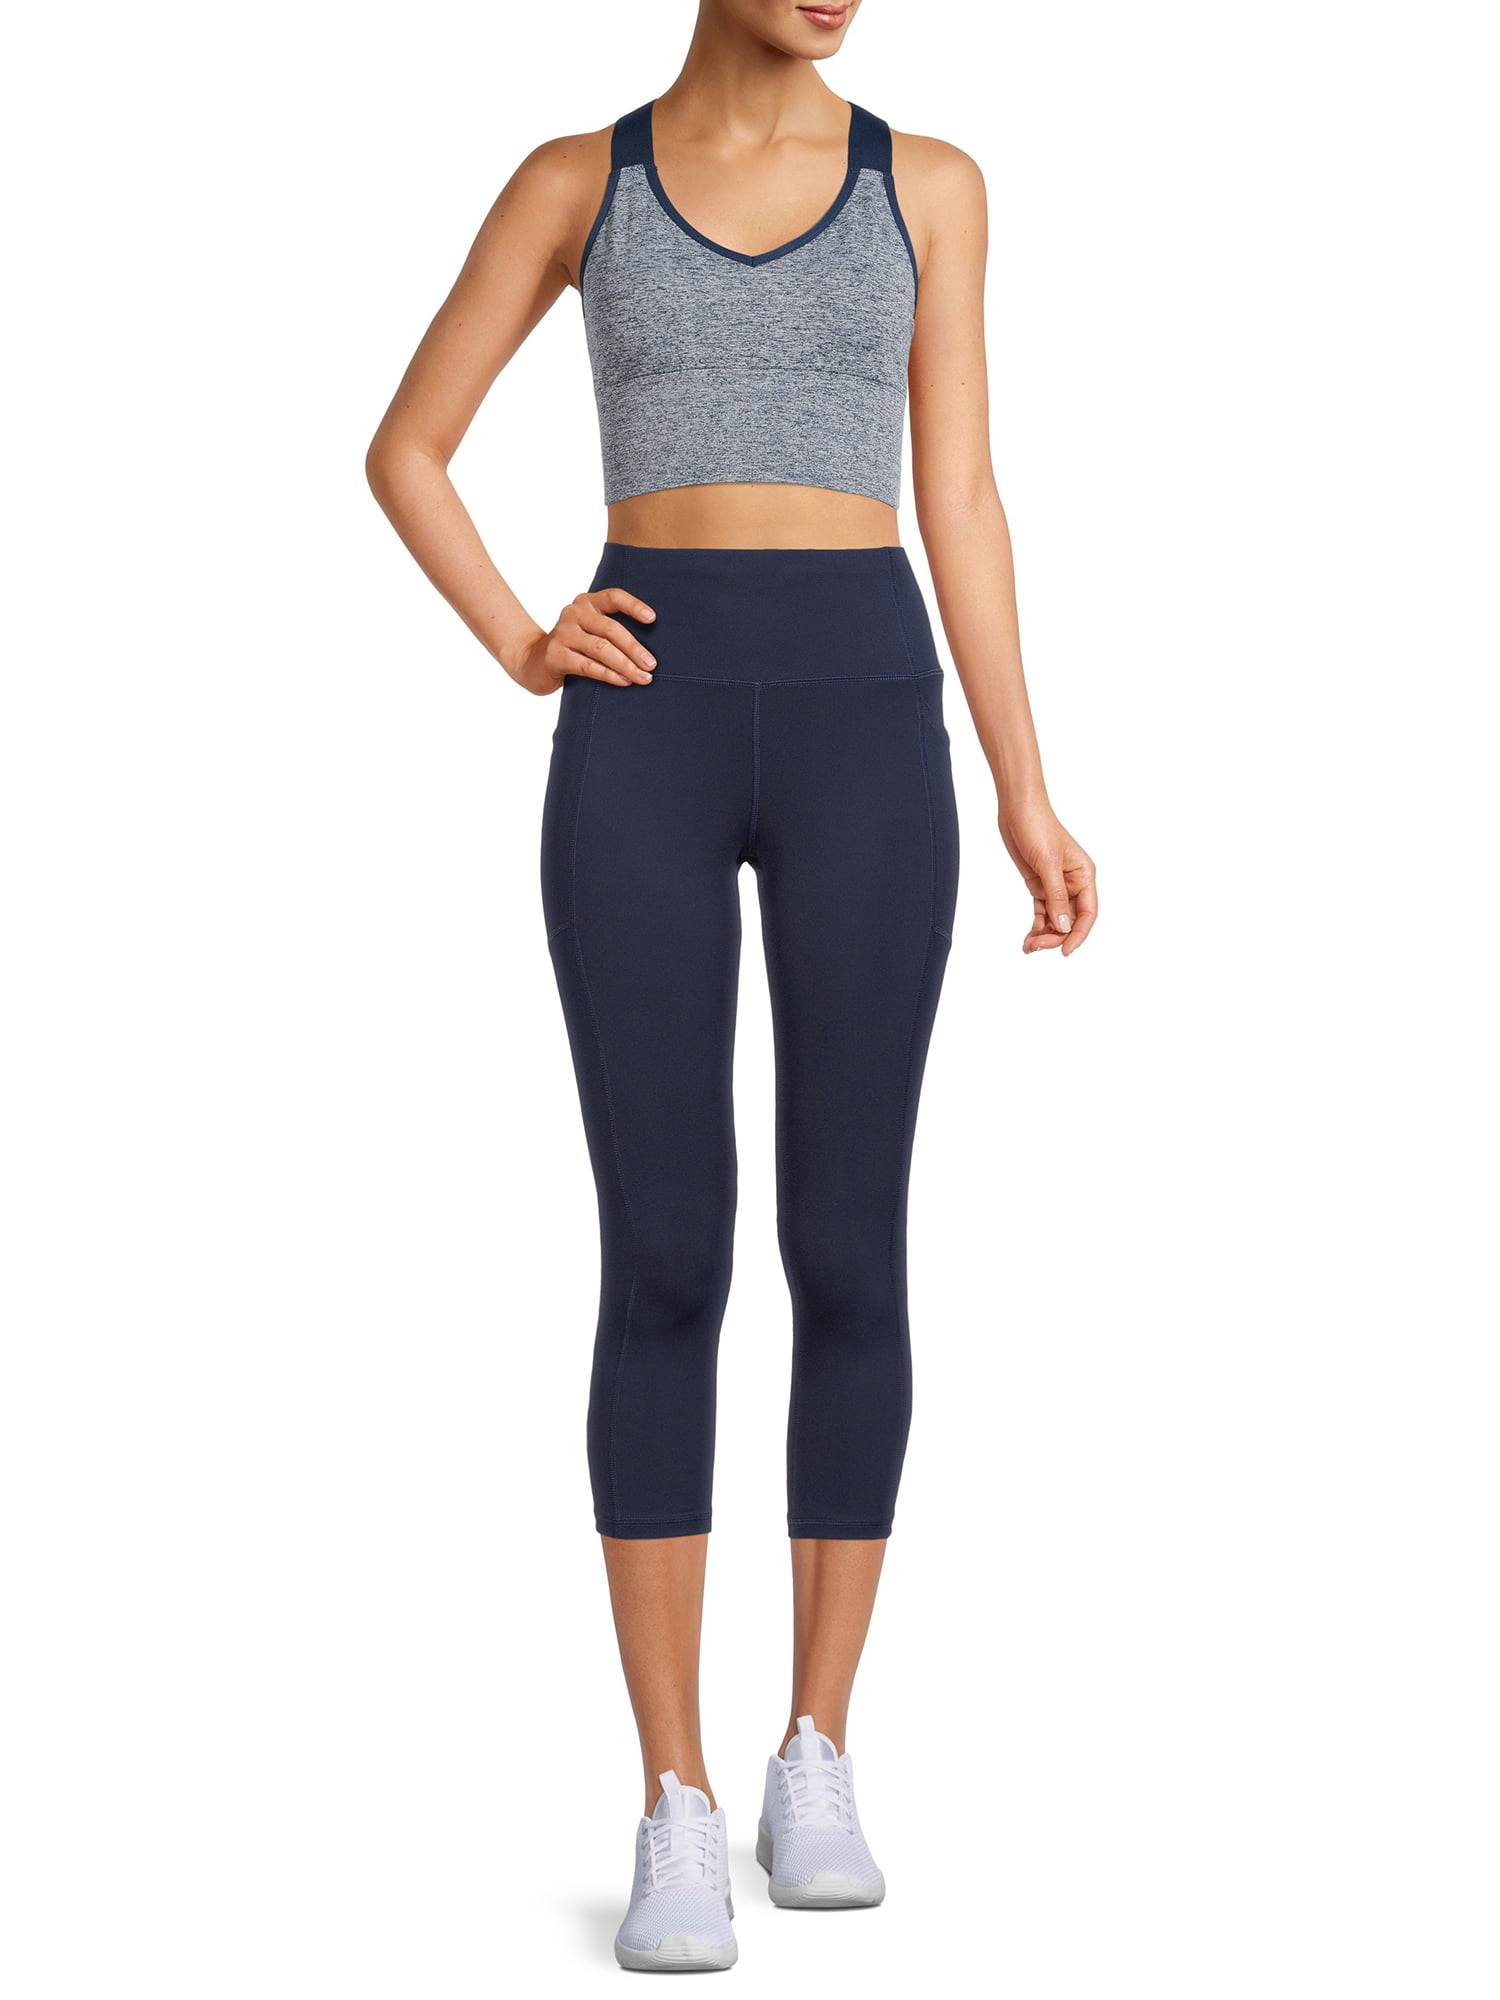 Womens Yoga Outfit Set With Sporty Avia Leggings With Pockets And Pocket On  Back Perfect For Gym, Running, And Casual Wear By 4 Lululemen From  Fashionsclothing, $18.1